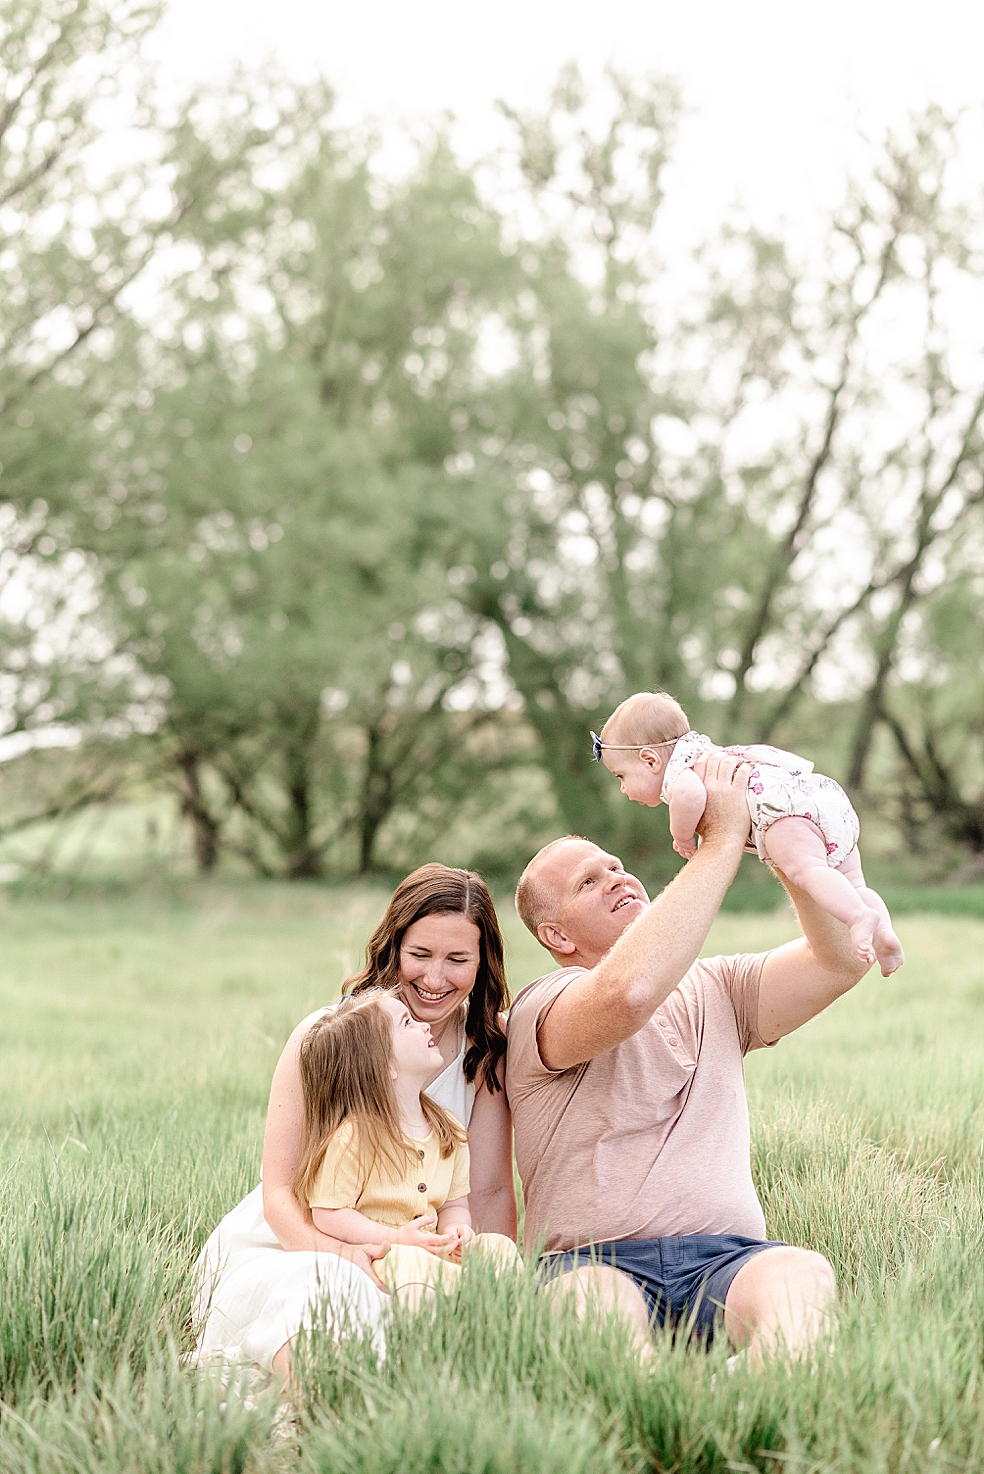 Mom and dad sitting in the grass with their girls | Photo by Jessica Lee Photography